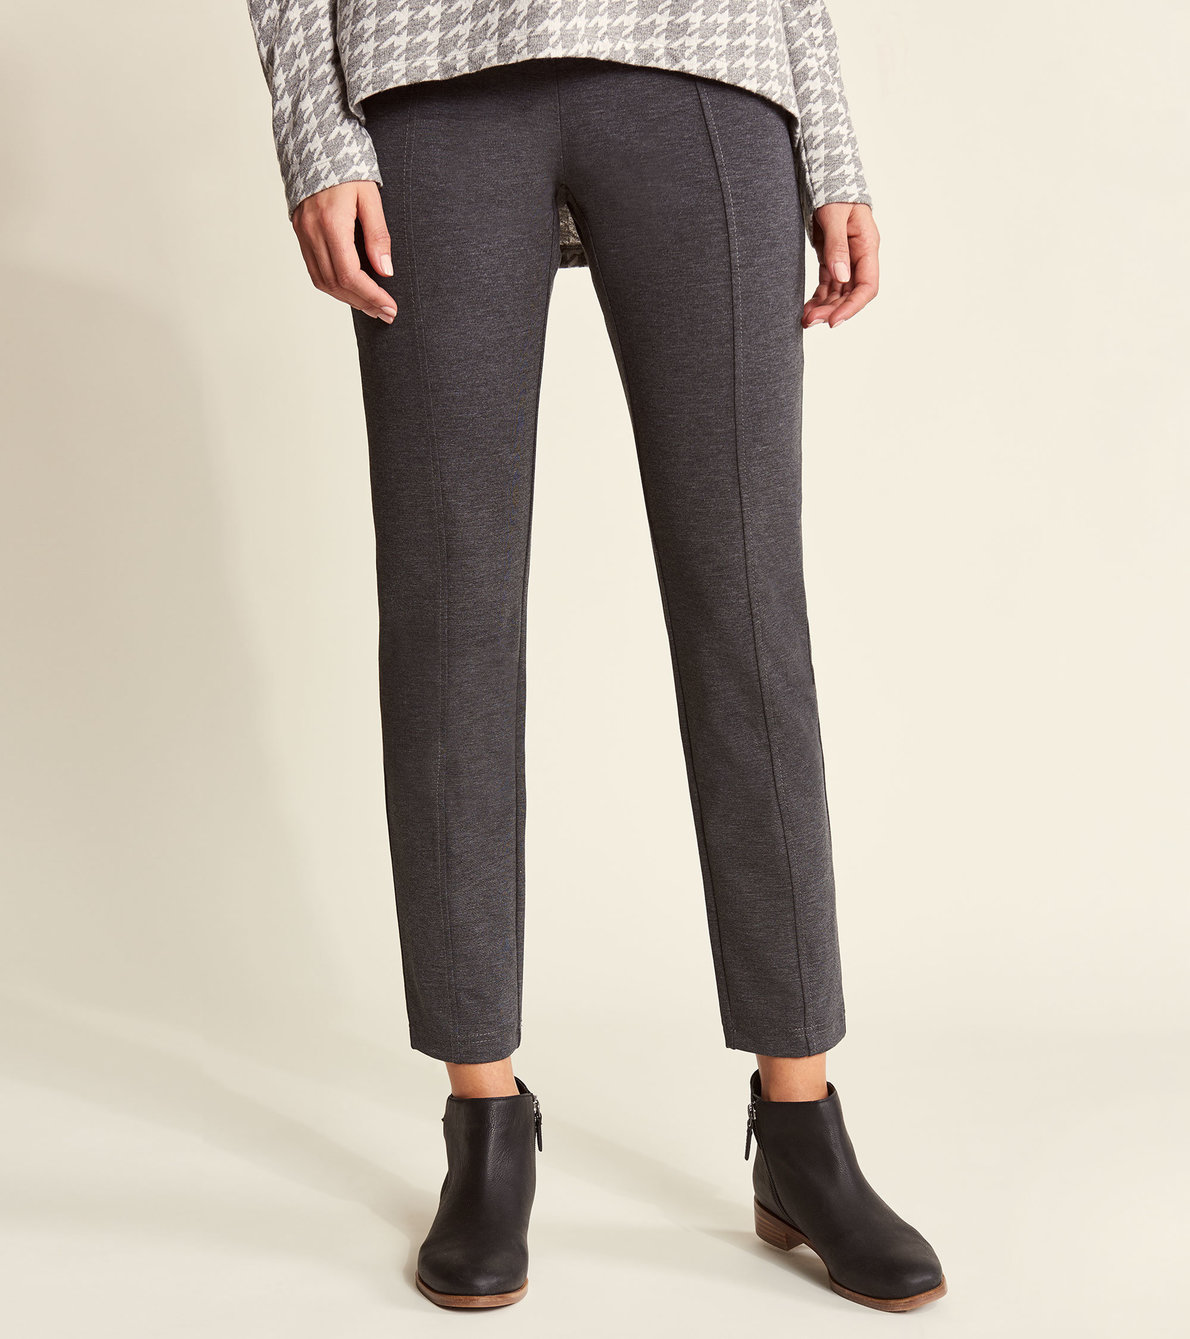 View larger image of Kate Ponte Pants - Charcoal